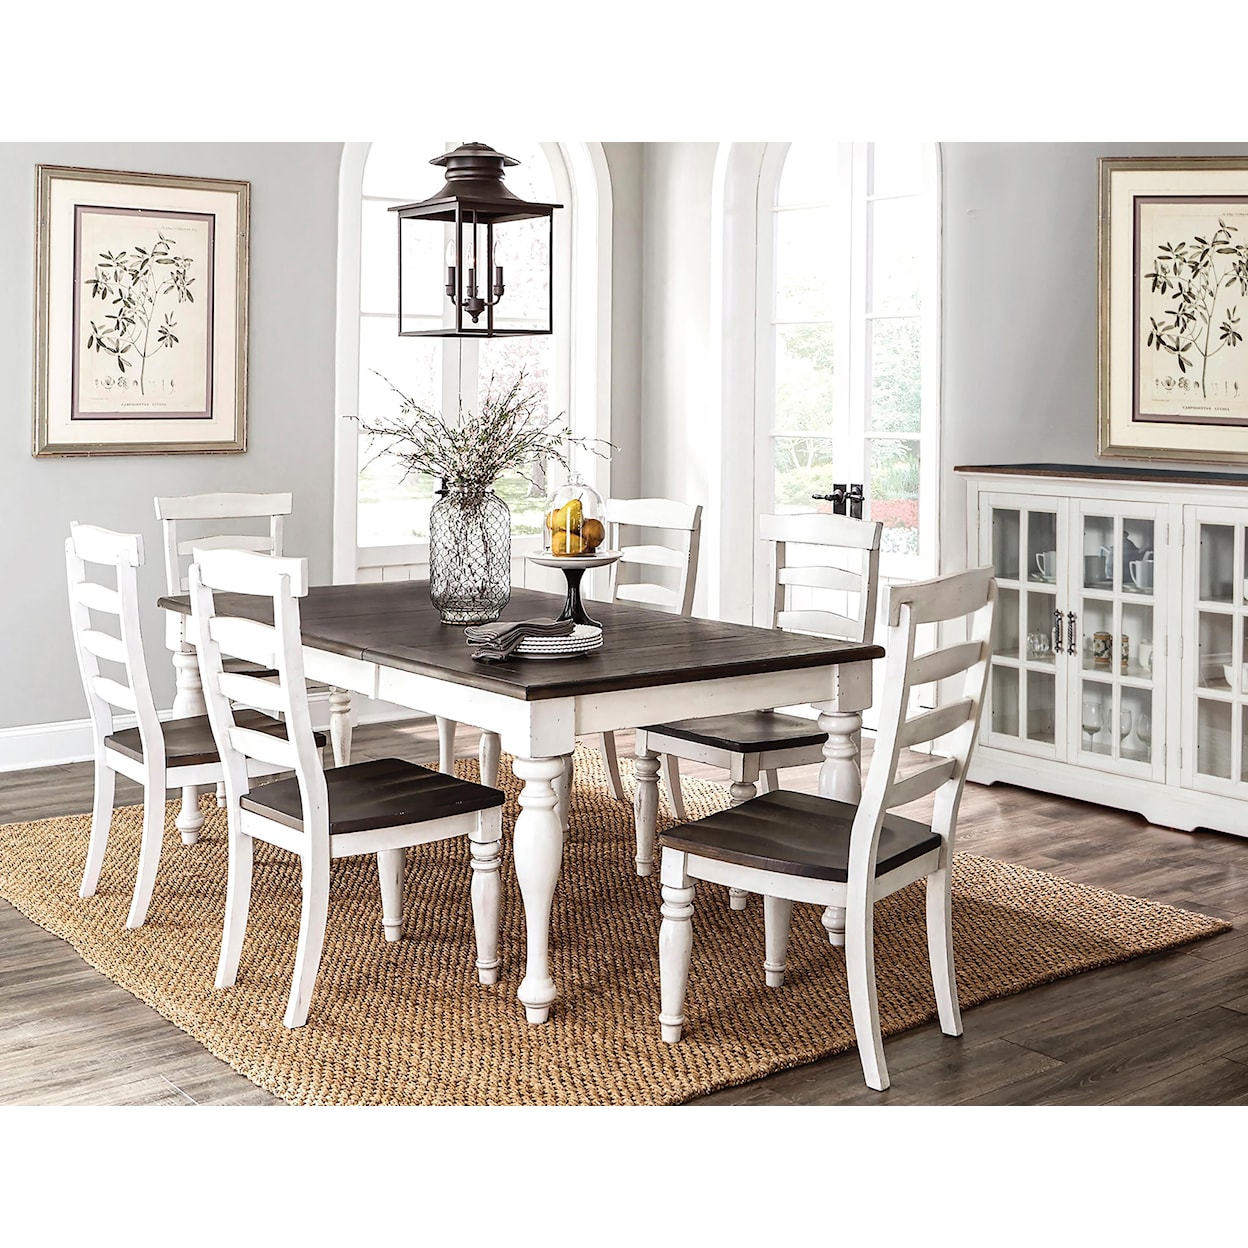 Sunny Designs Carriage House 7-Piece Table and Chair Set